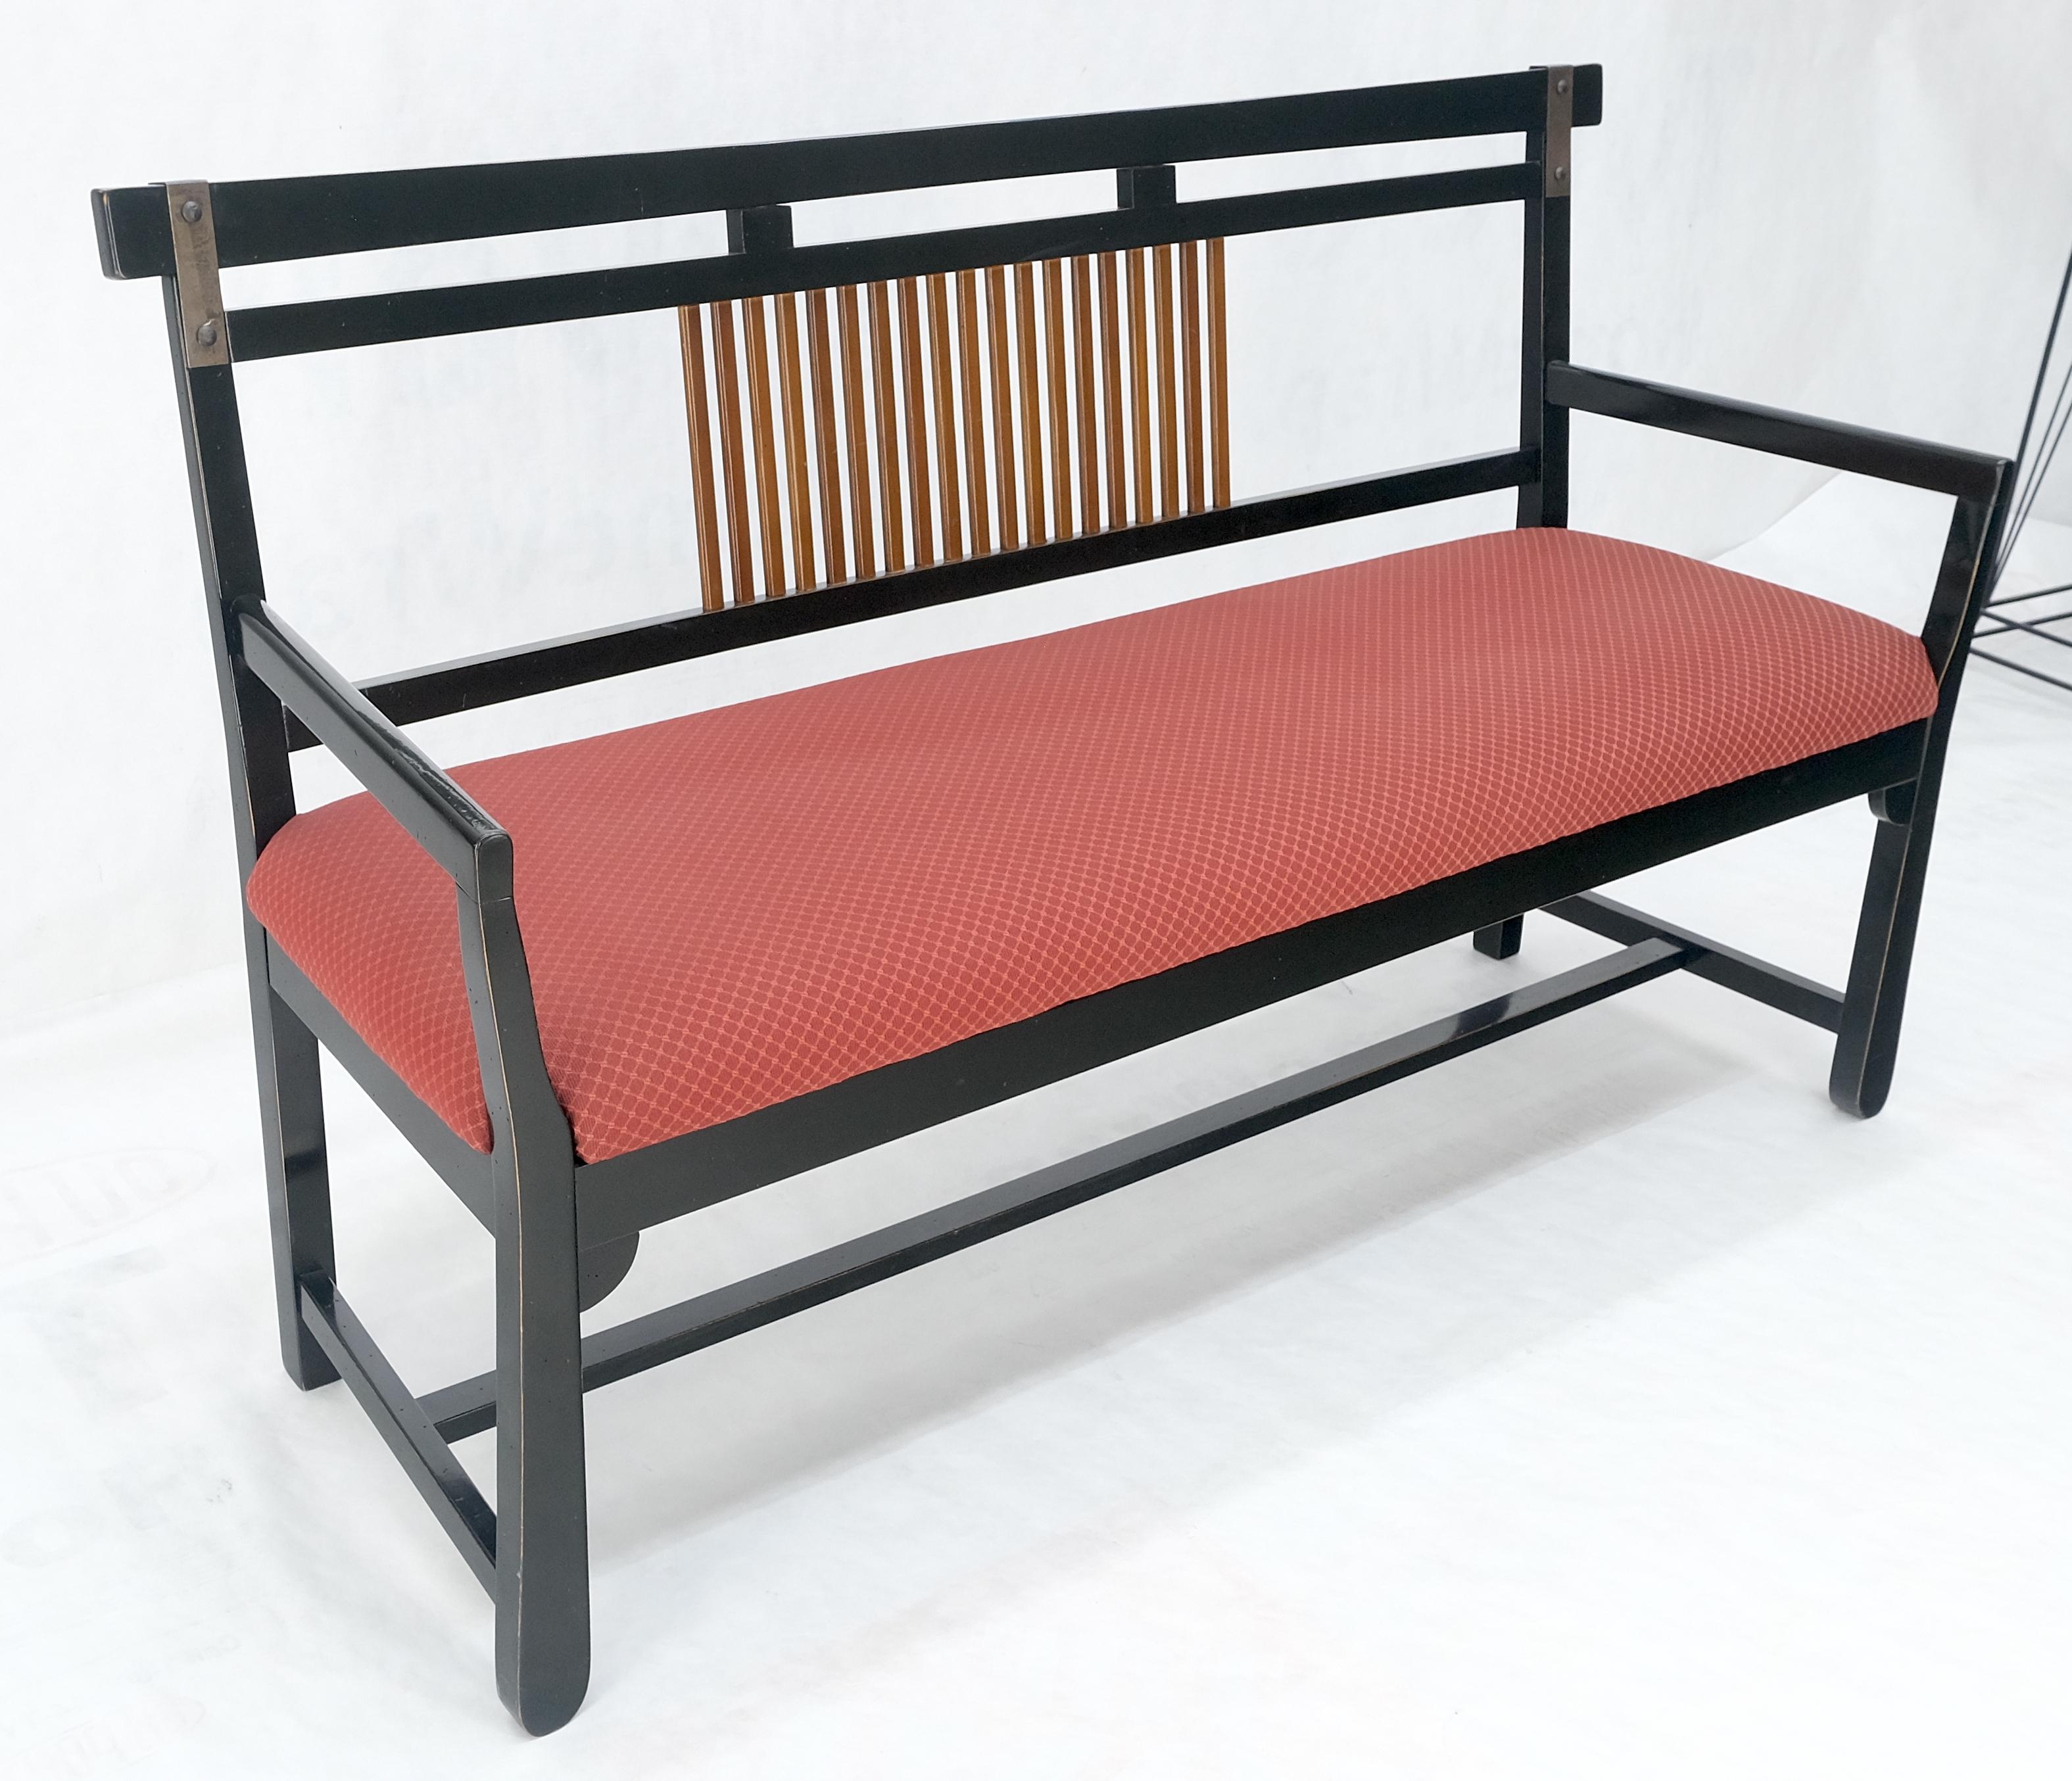 Vintage Black Lacquer Red Upholstery Bench w/ Arms Slotted Back MINT For Sale 4